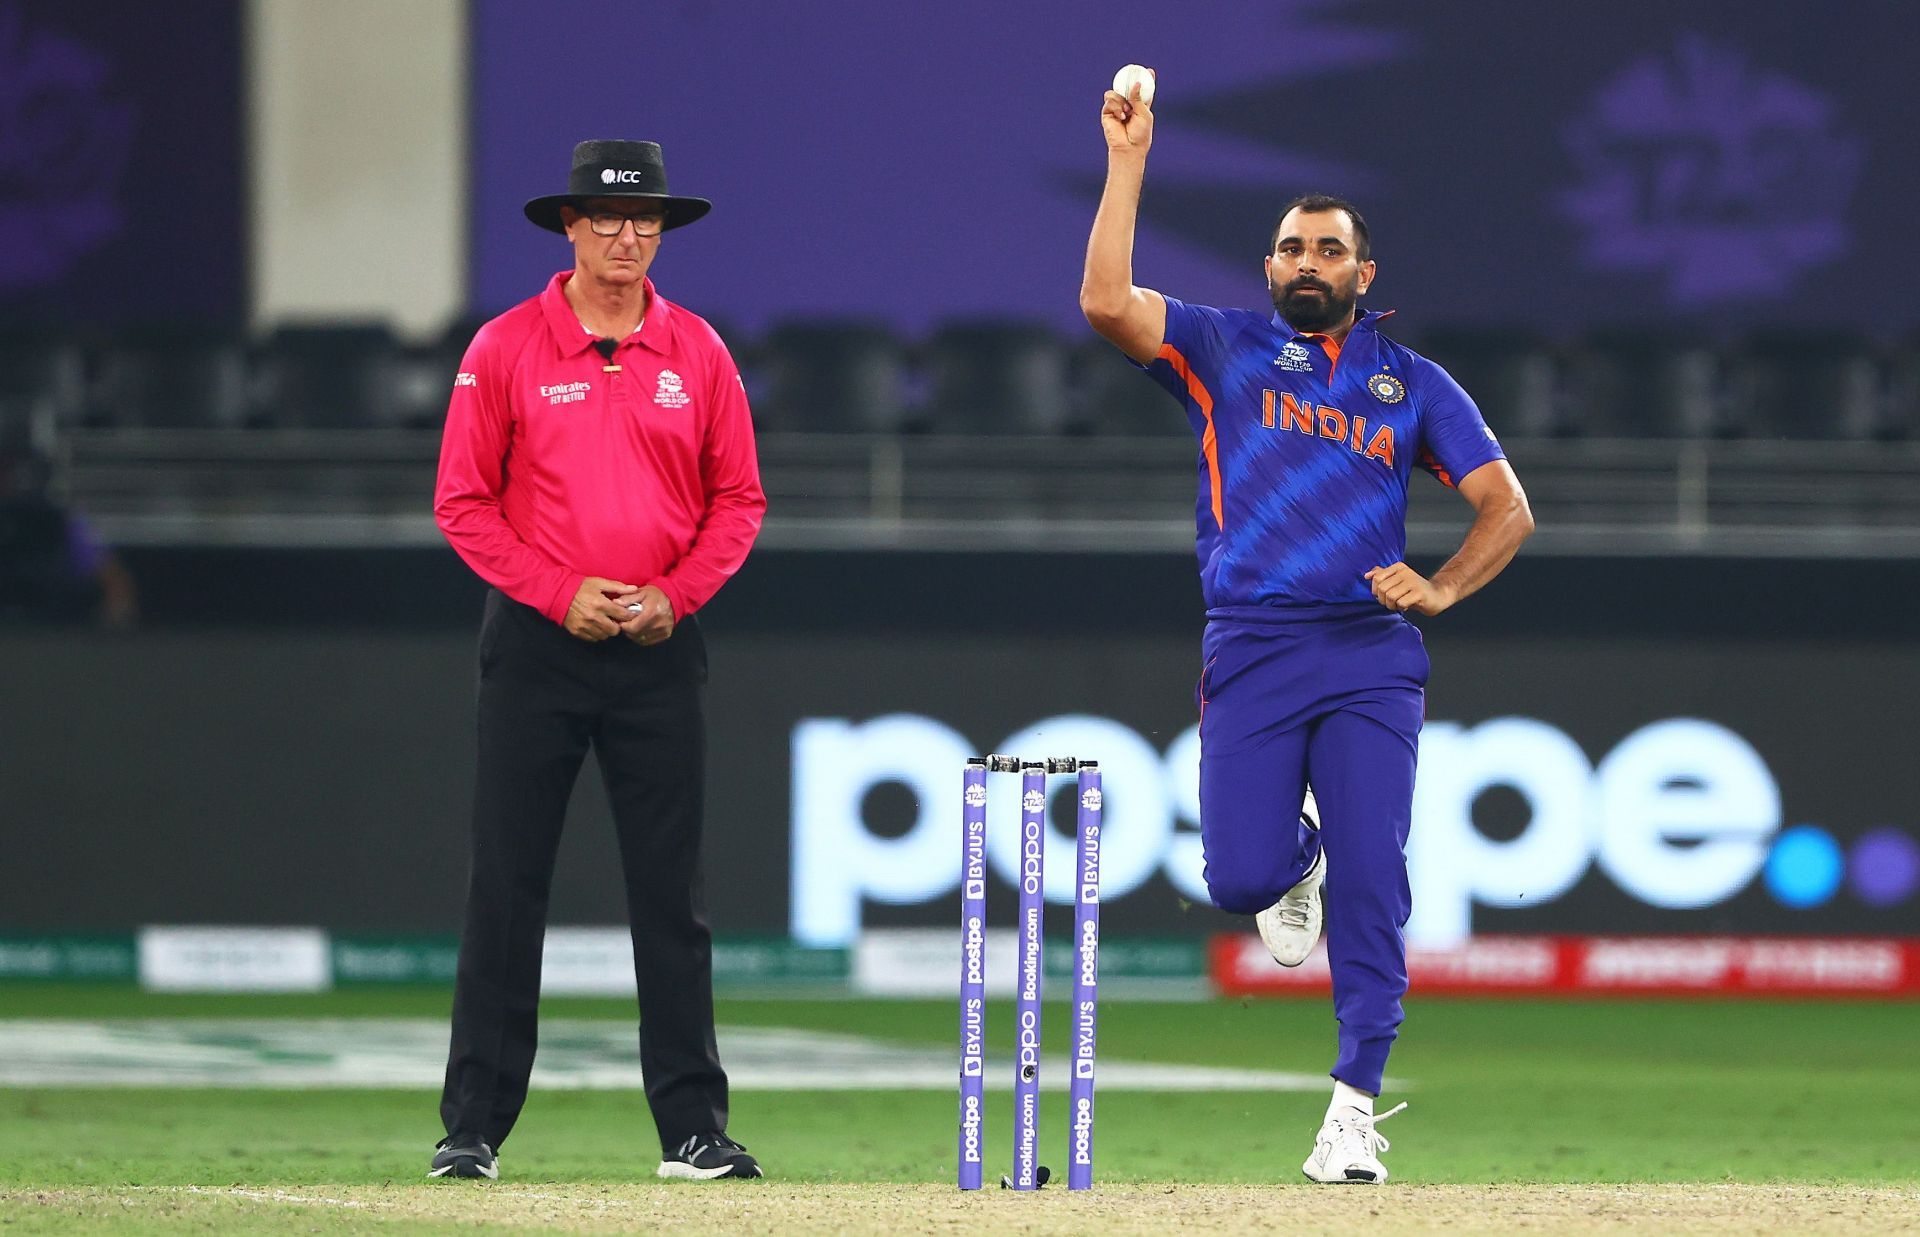 Mohammed Shami has played just 17 T20Is for Team India